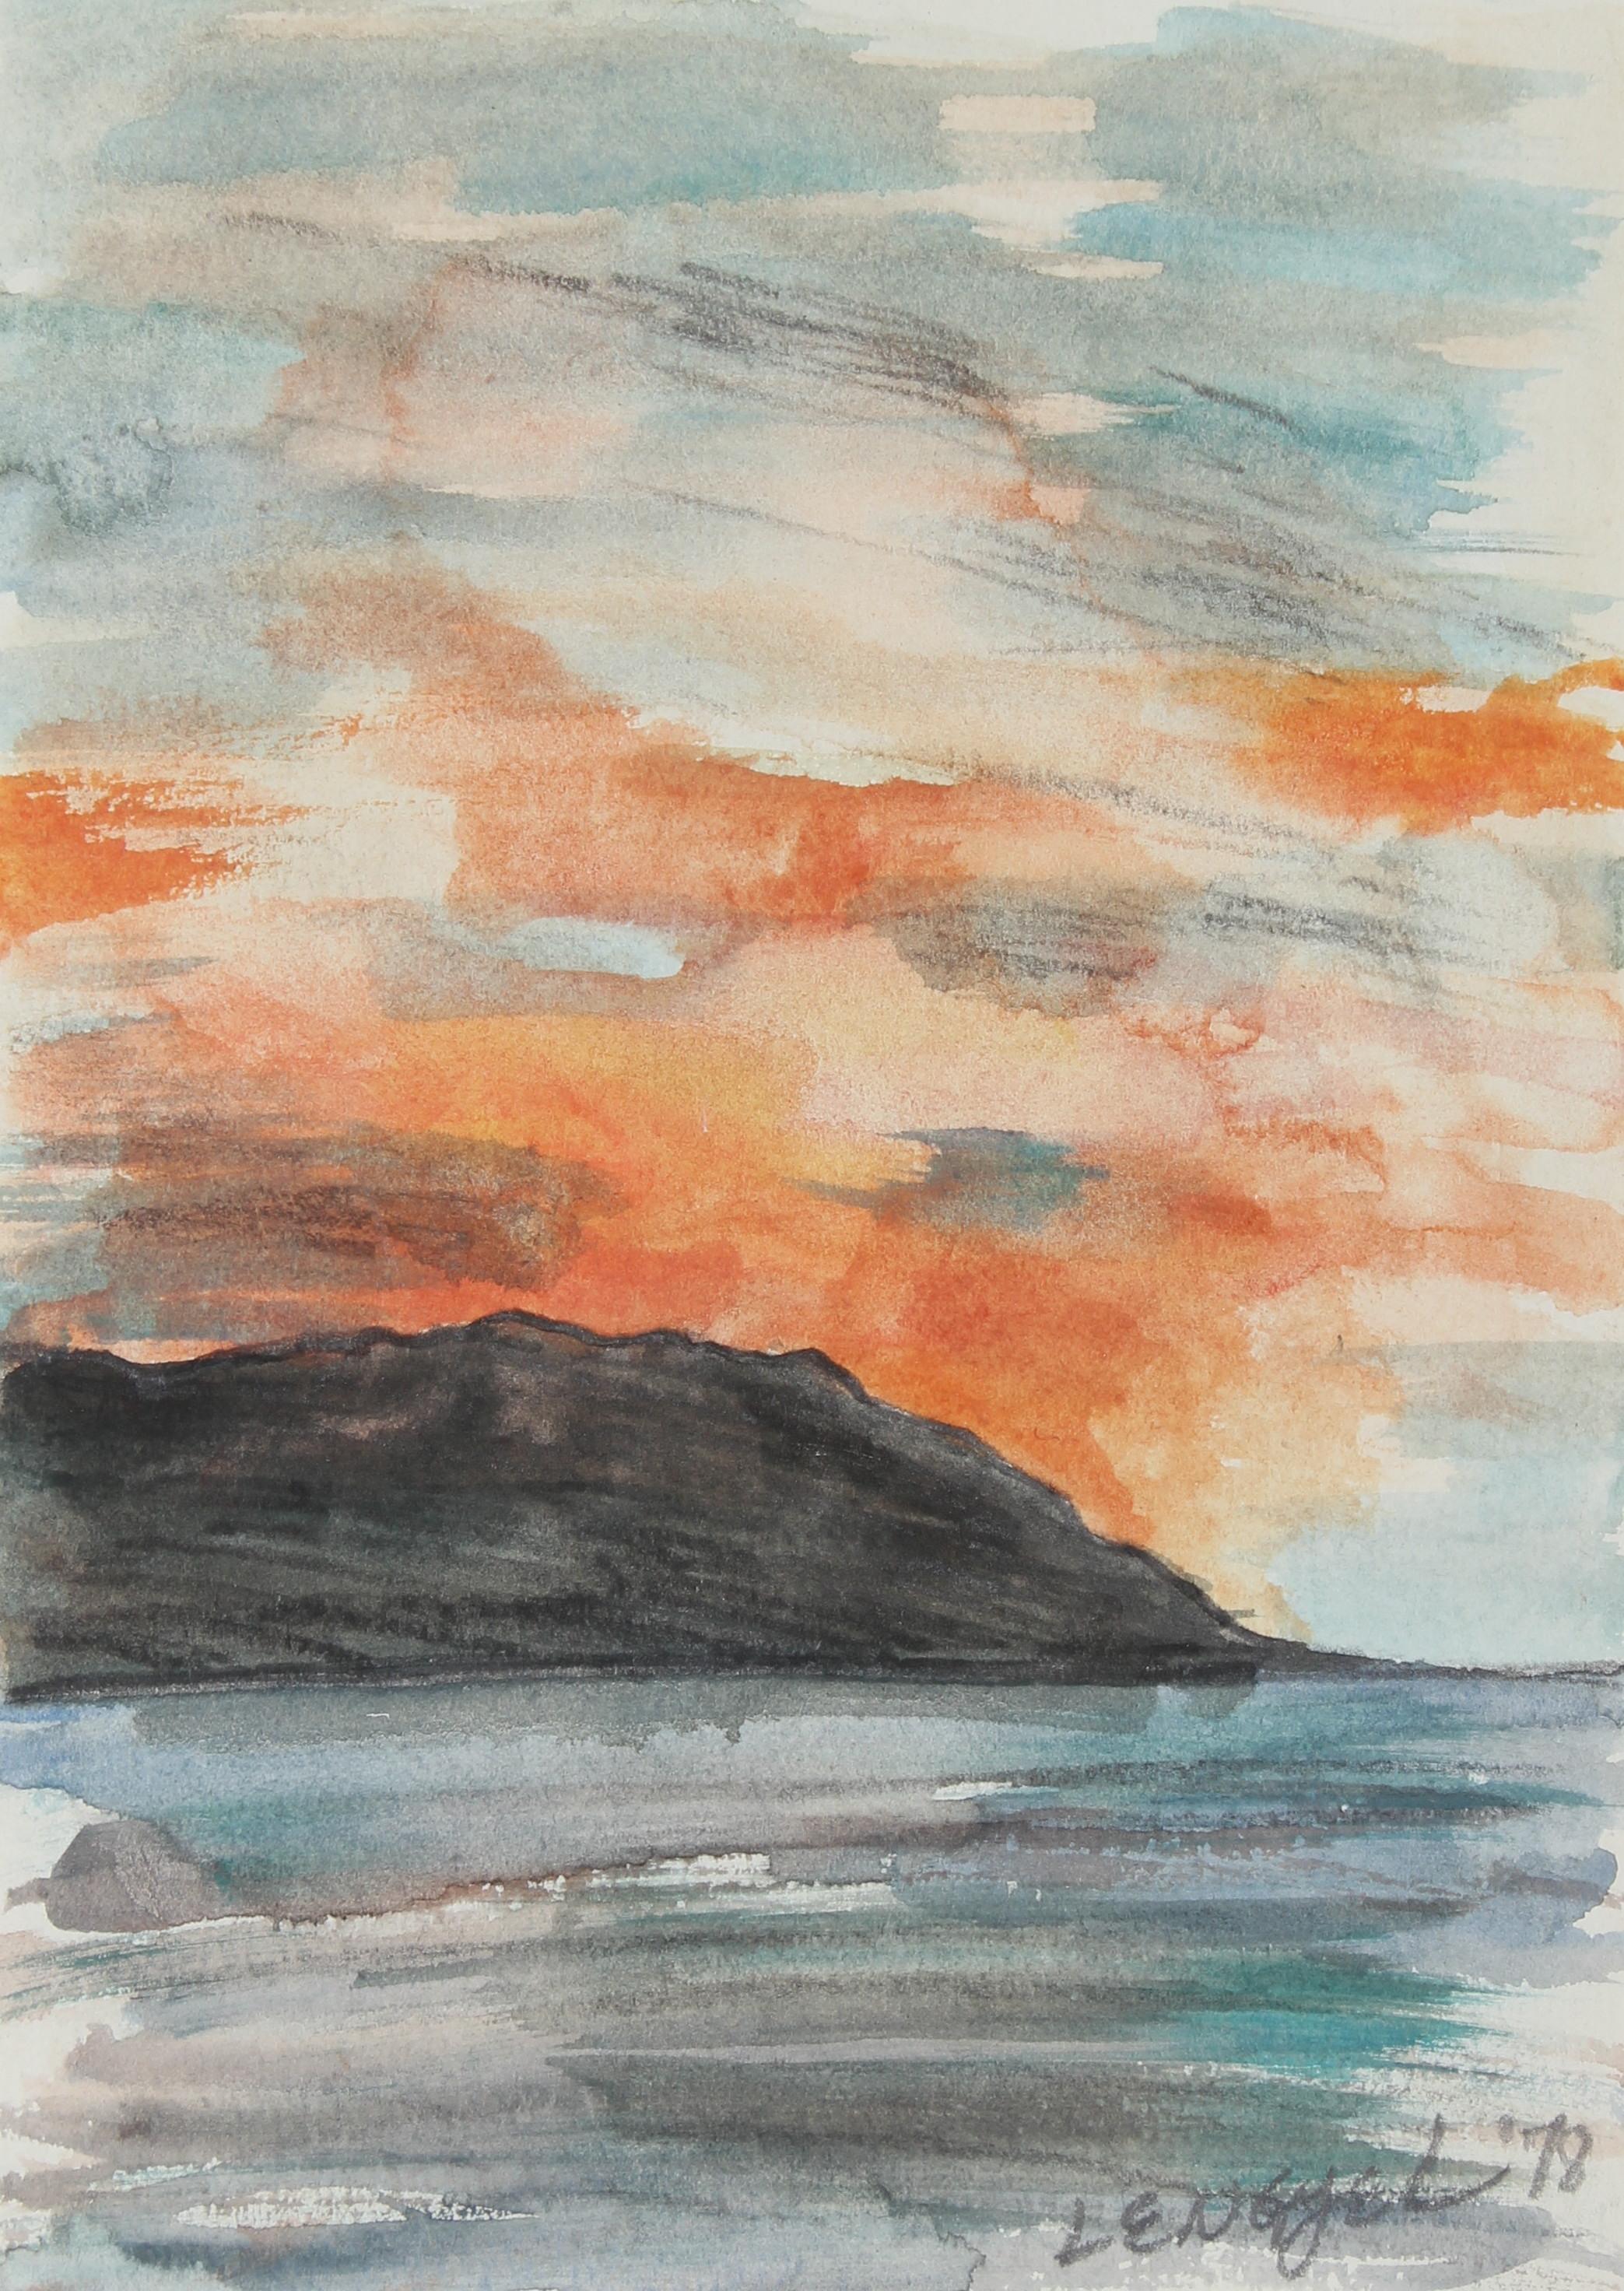 "Cabo San Lucas" Mexico Sunset Landscape in Watercolor, 1978